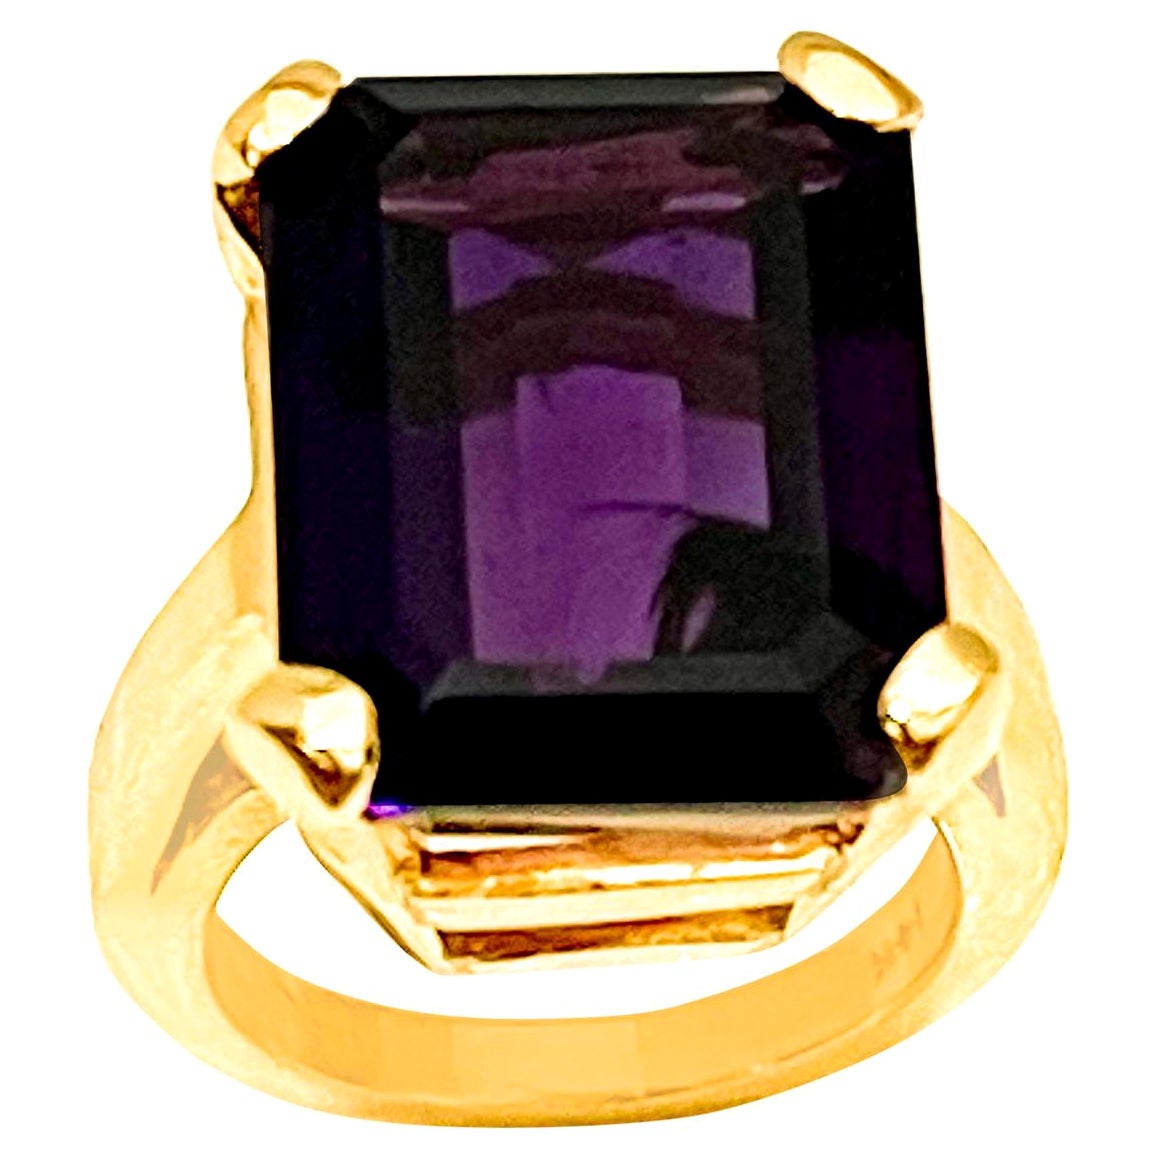 15 Carat Emerald Cut Amethyst Cocktail Ring in 14 Karat Yellow Gold For Sale